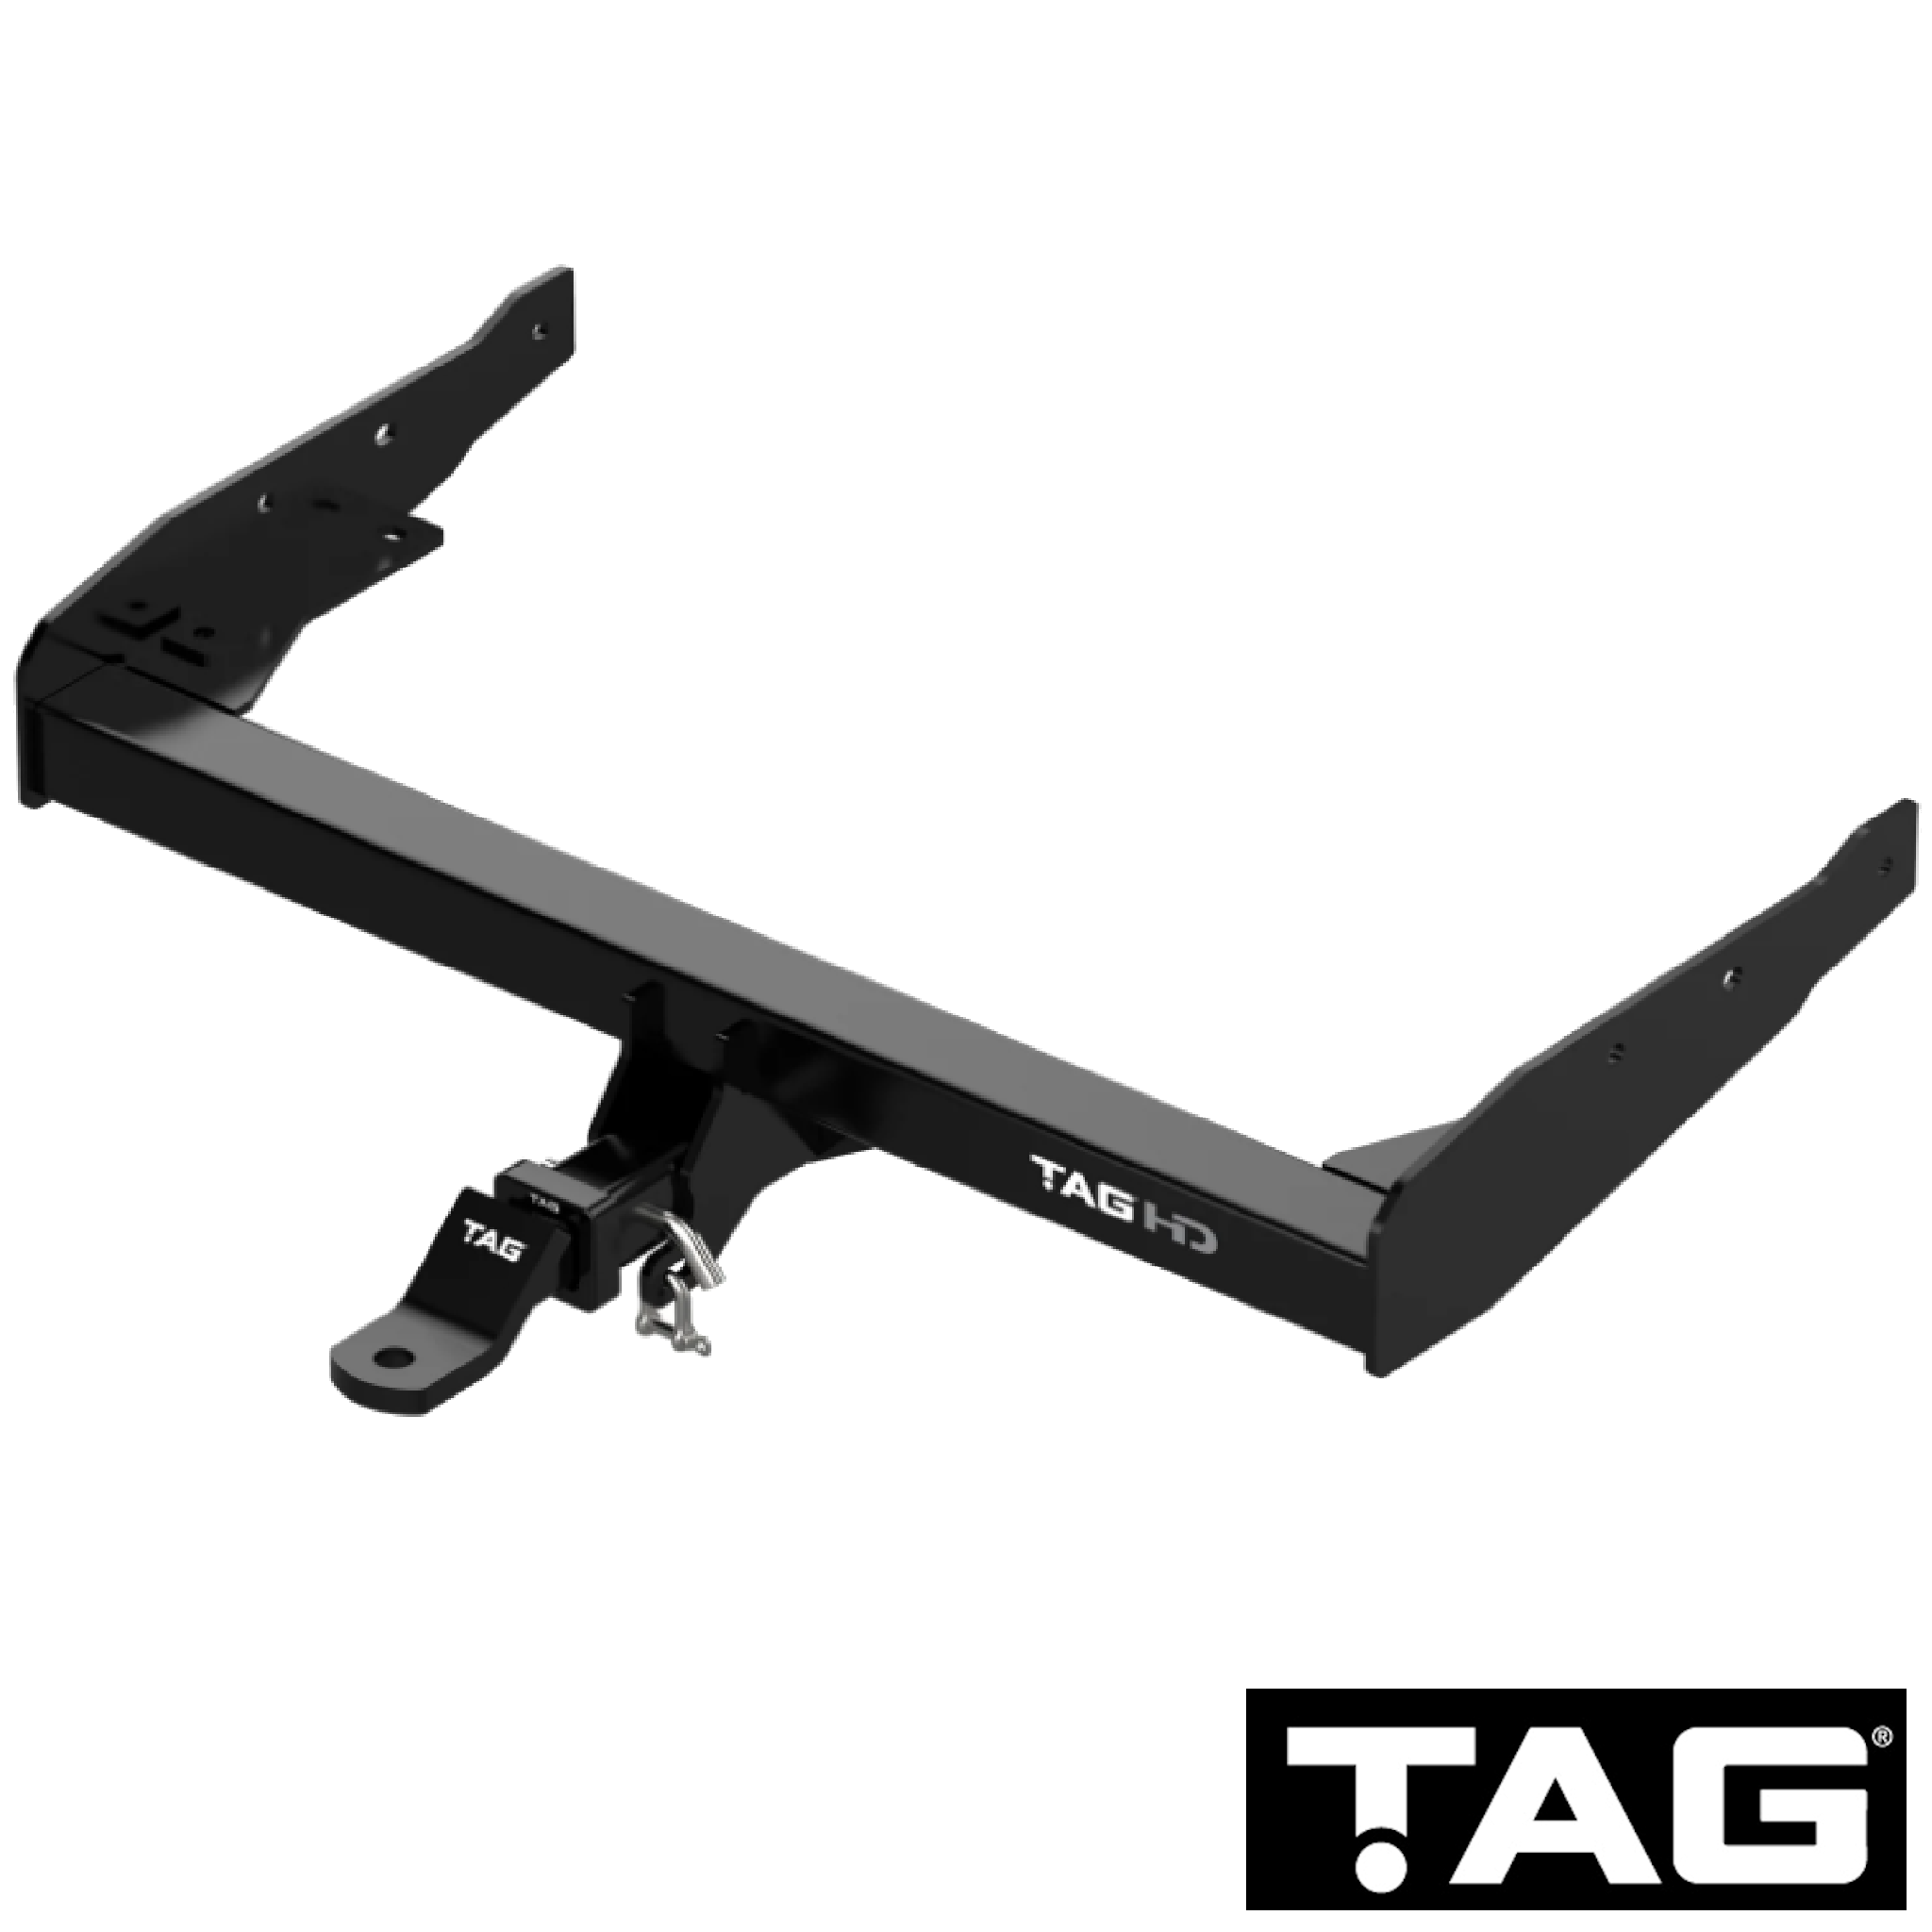 Holden Colorado RG DX LX LT Extended Cab Chassis 06/2012 - 07/2020 - Towbar Kit - HEAVY DUTY EXTENDED TRAY